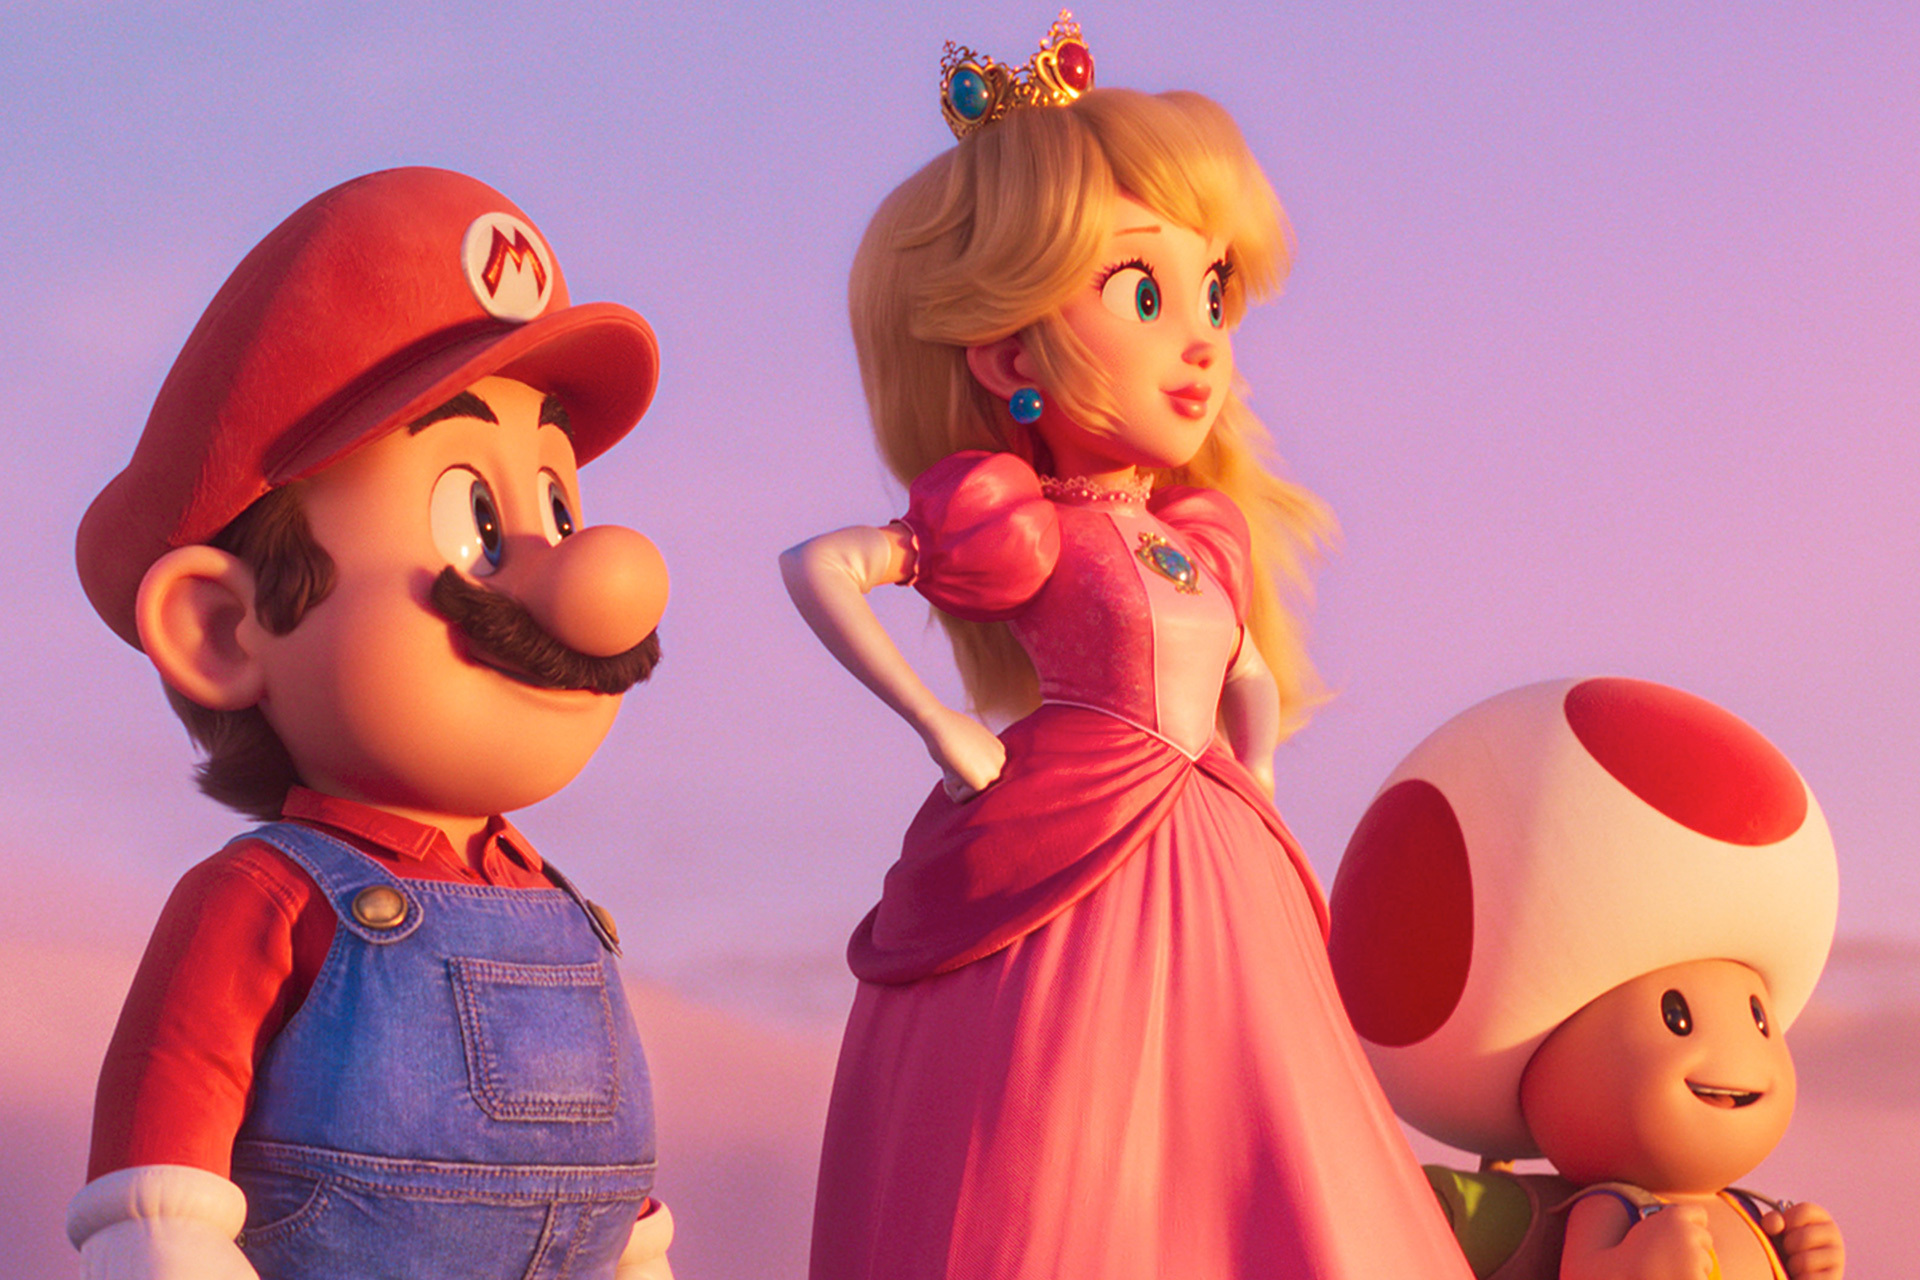 The Super Mario Bros. Movie' is now streaming on Peacock